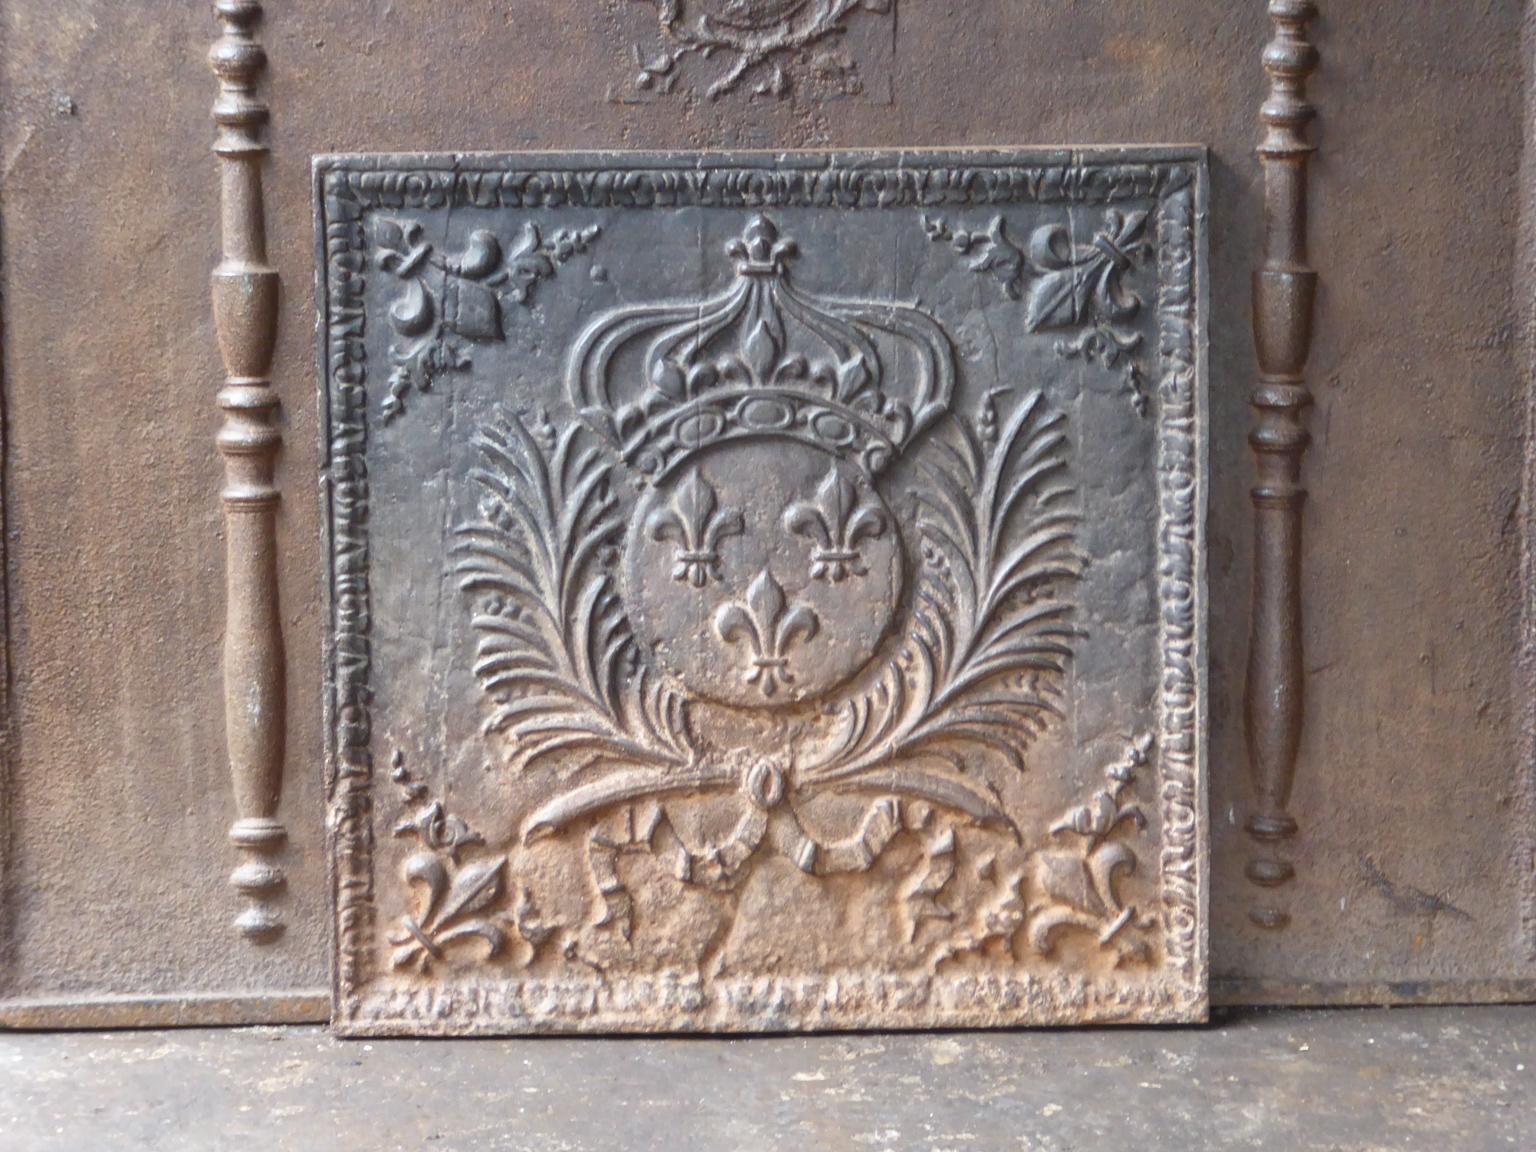 20th Century French Louis XIV style fireback with the arms of France. Coat of arms of the House of Bourbon, an originally French royal house that became a major dynasty in Europe. It delivered kings for Spain (Navarra), France, both Sicilies and